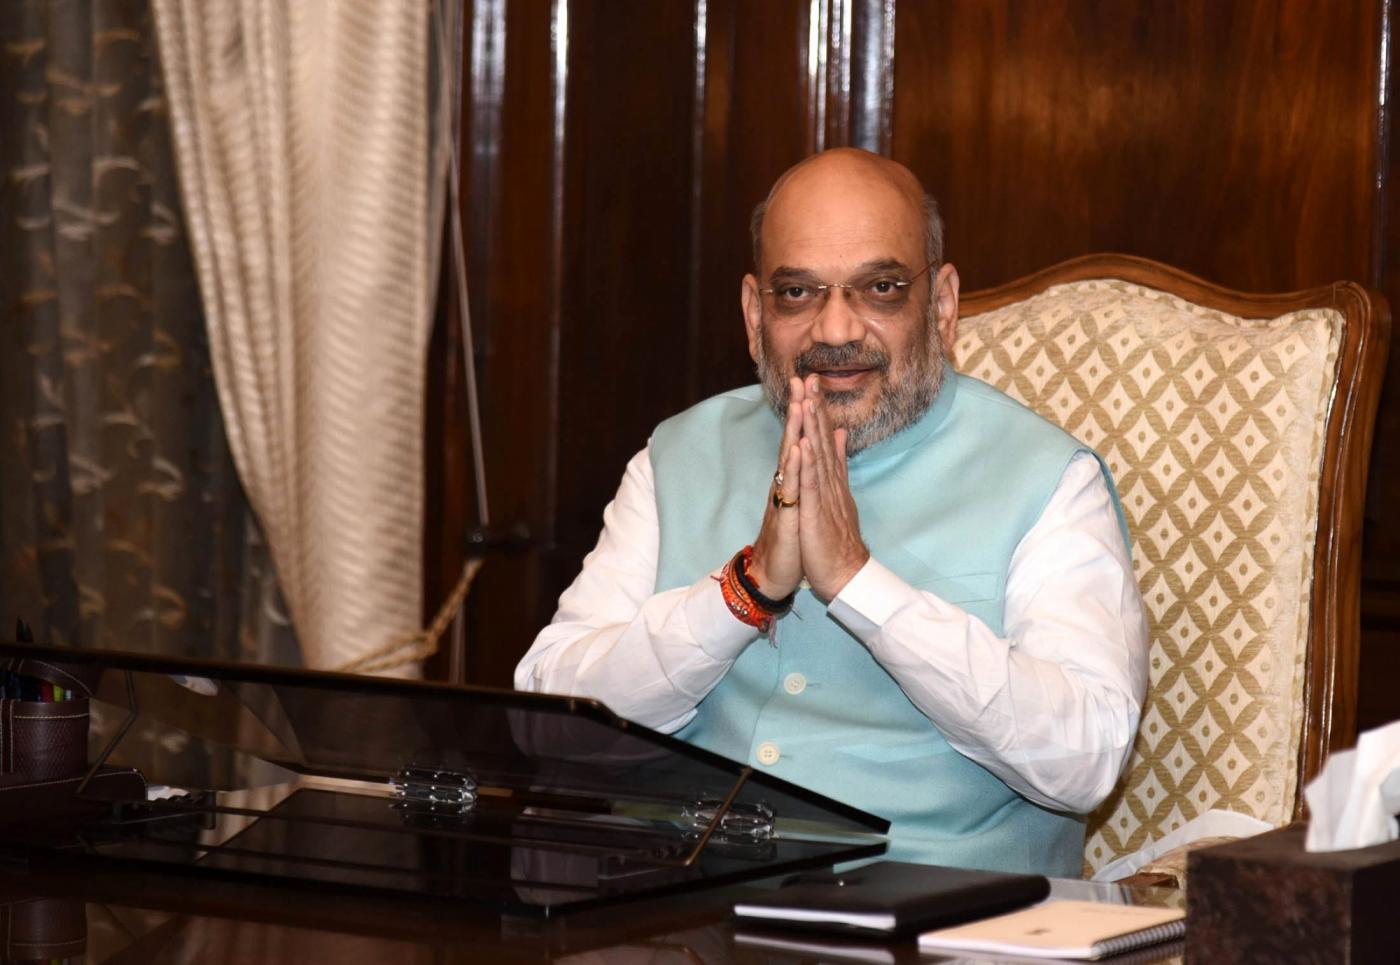 New Delhi: Amit Shah takes charge as the Union Minister for Home Affairs, in New Delhi on June 1, 2019. (Photo: IANS/PIB) by .